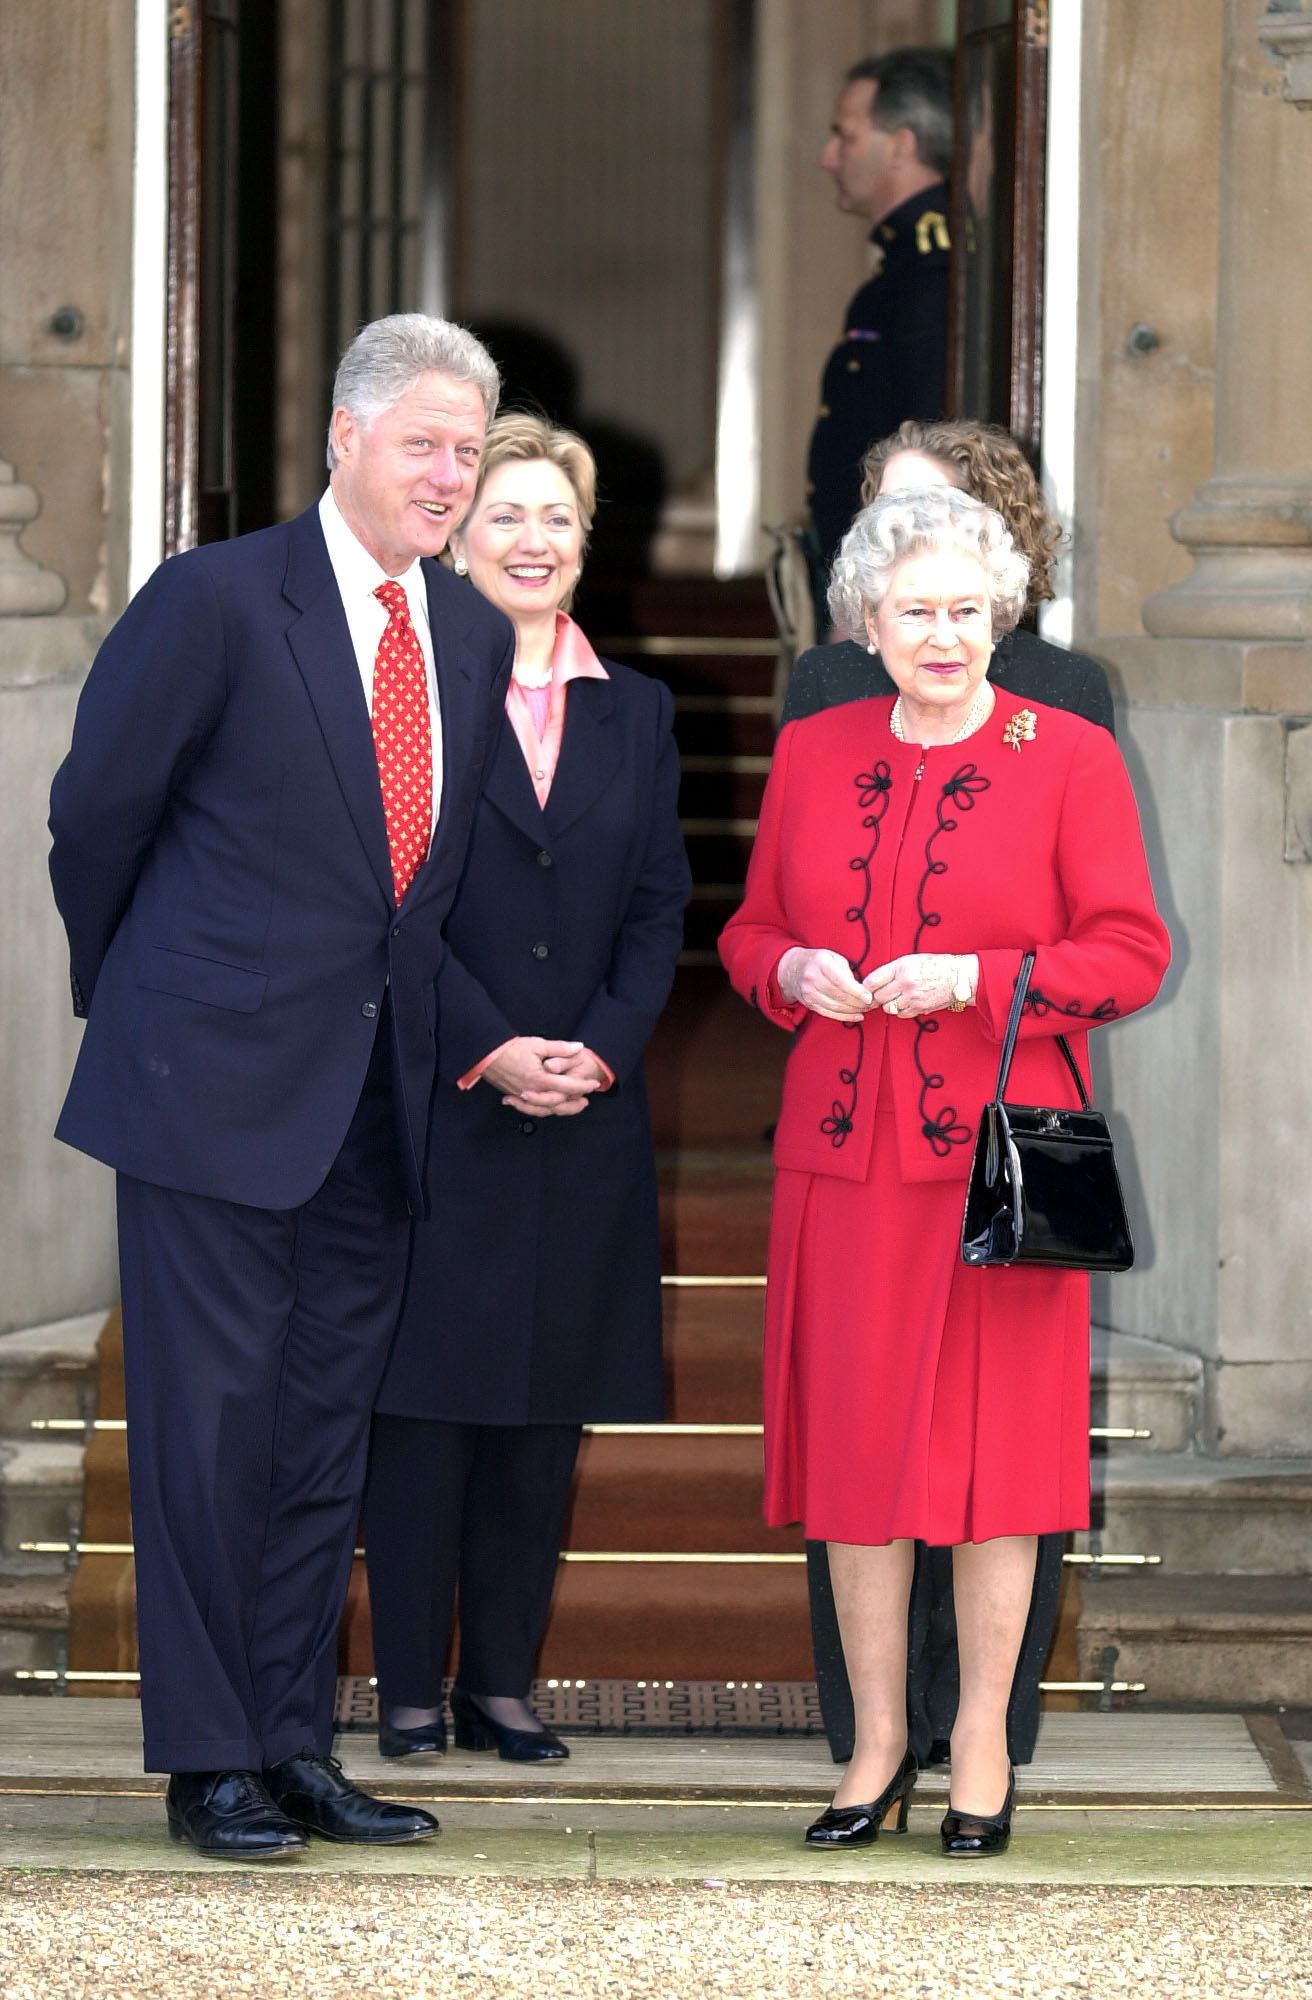 The handbag and shoe designers who received the Queen's Royal Warrant